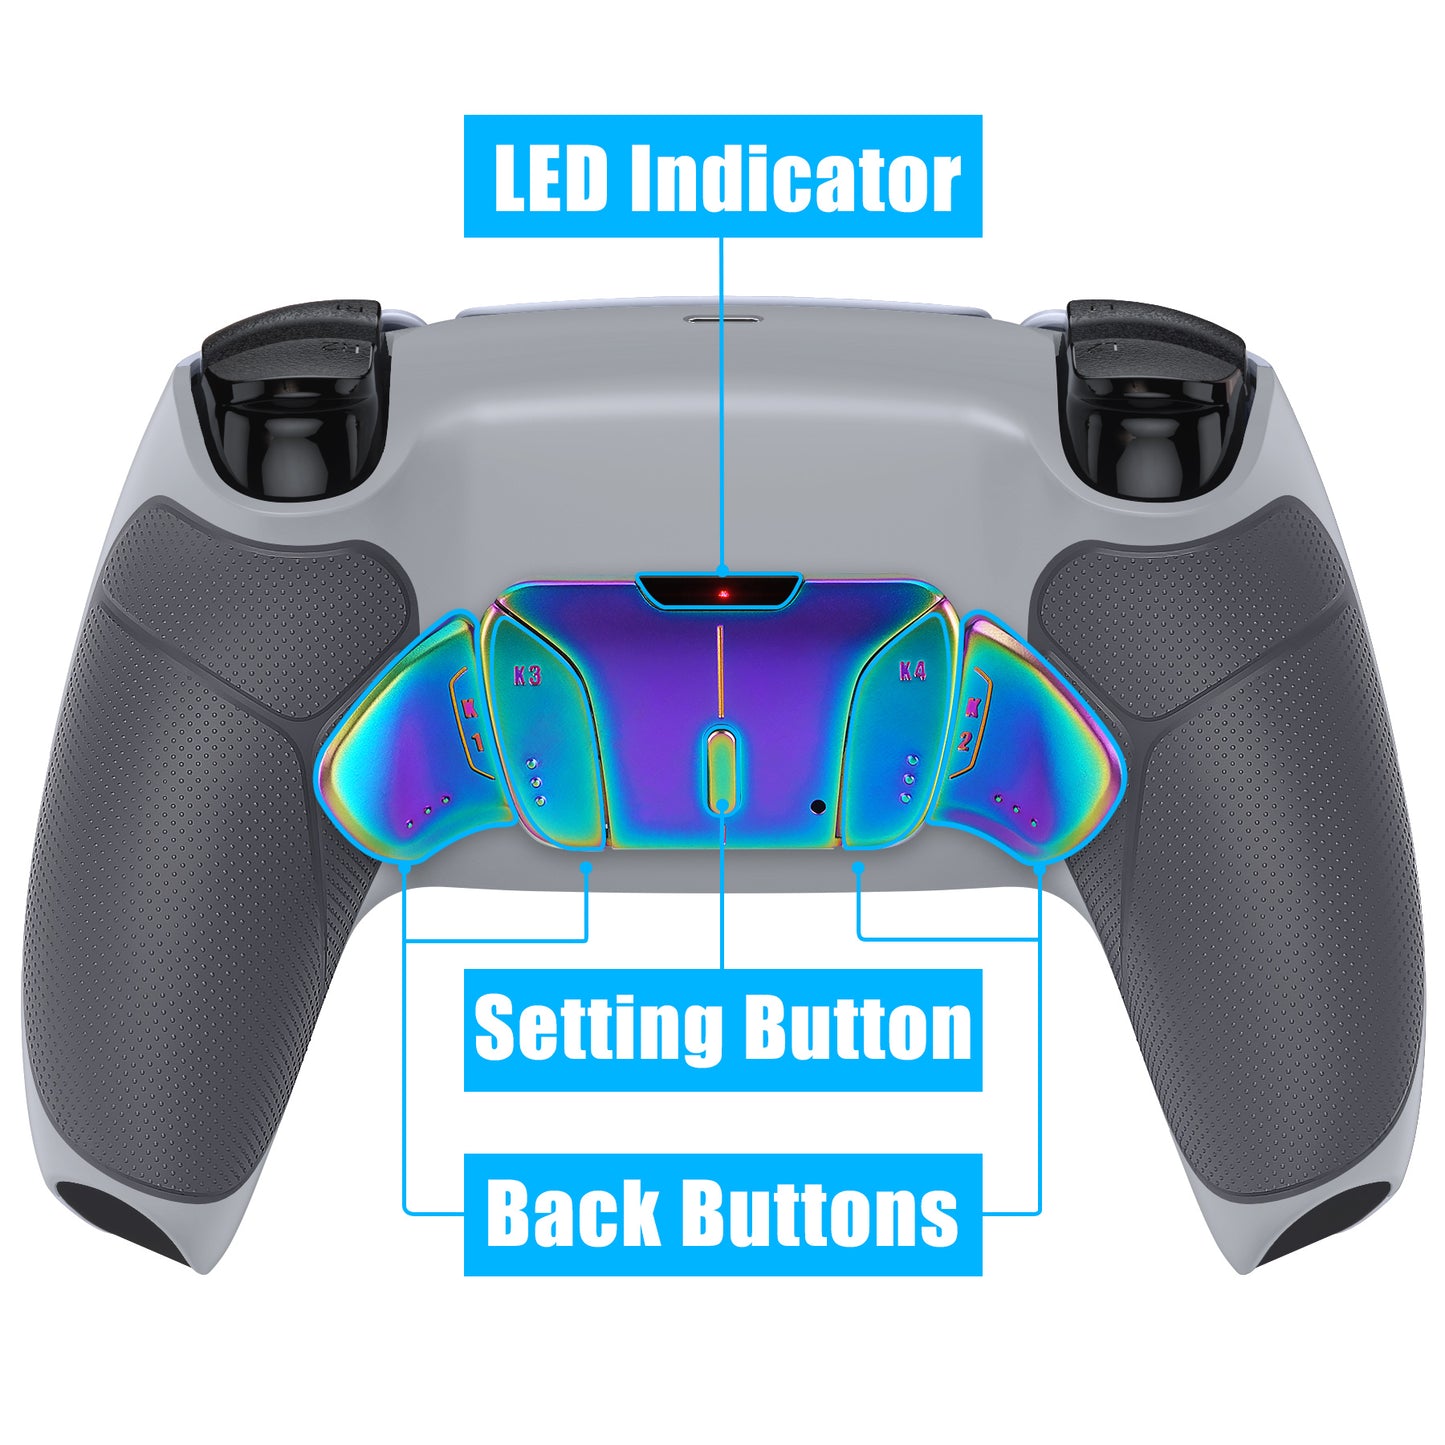 eXtremeRate Rainbow Aura Blue & Purple Real Metal Buttons (RMB) Version RISE4 Remap Kit for PS5 Controller BDM-010/020 - Rubberized New Hope Gray & Classic Gray eXtremeRate